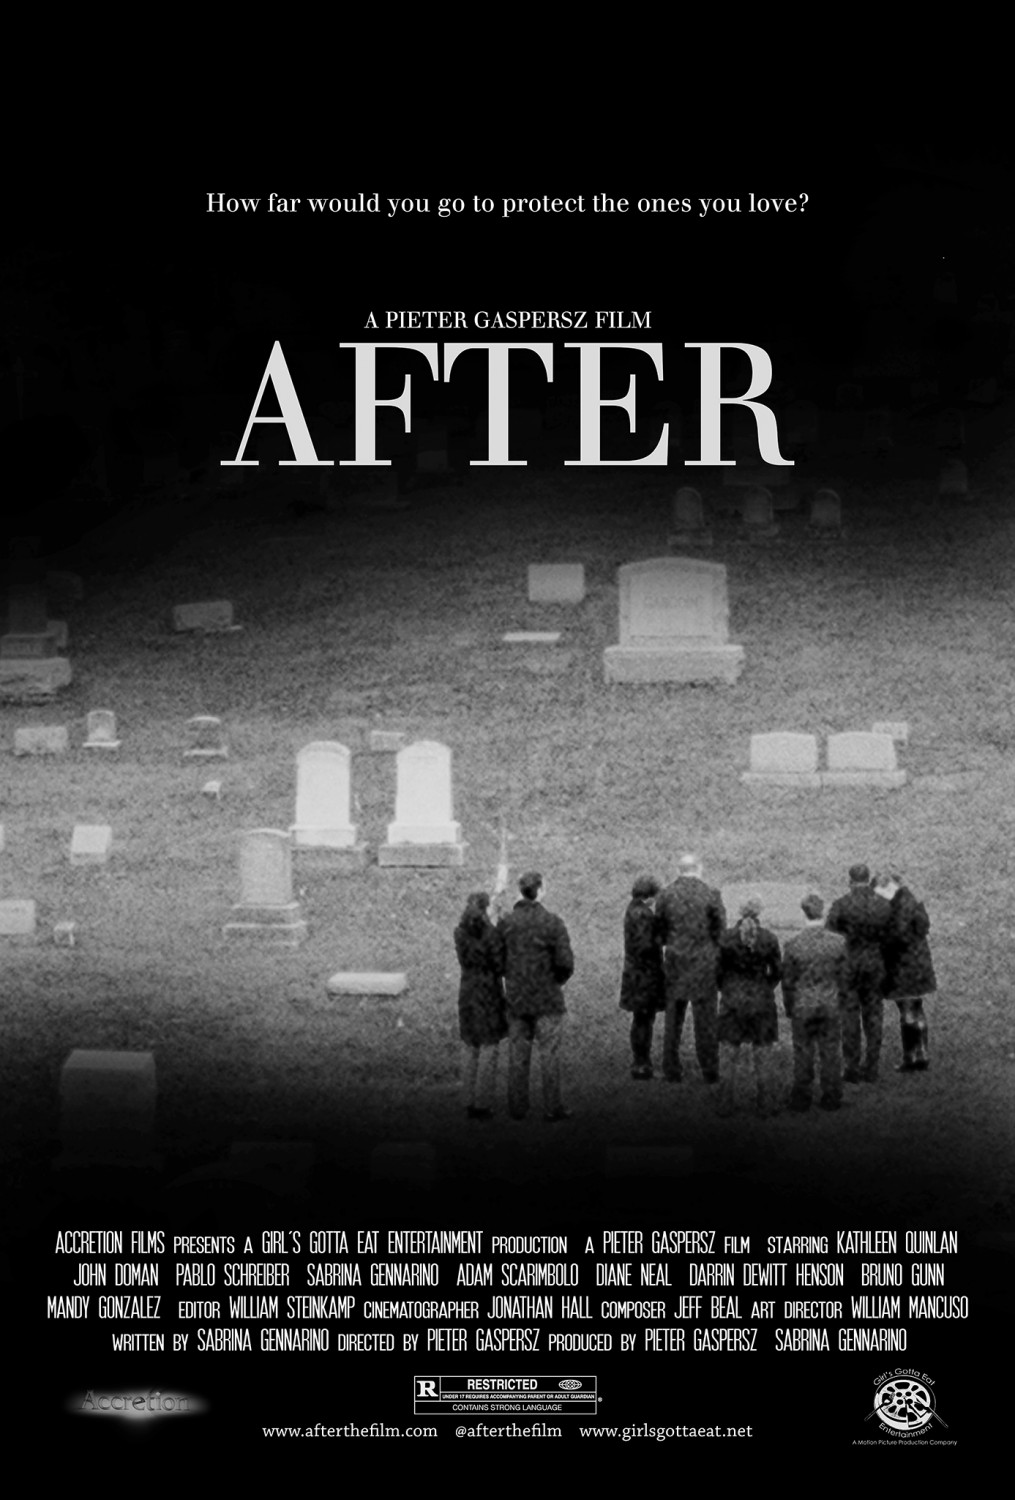 Extra Large Movie Poster Image for After 